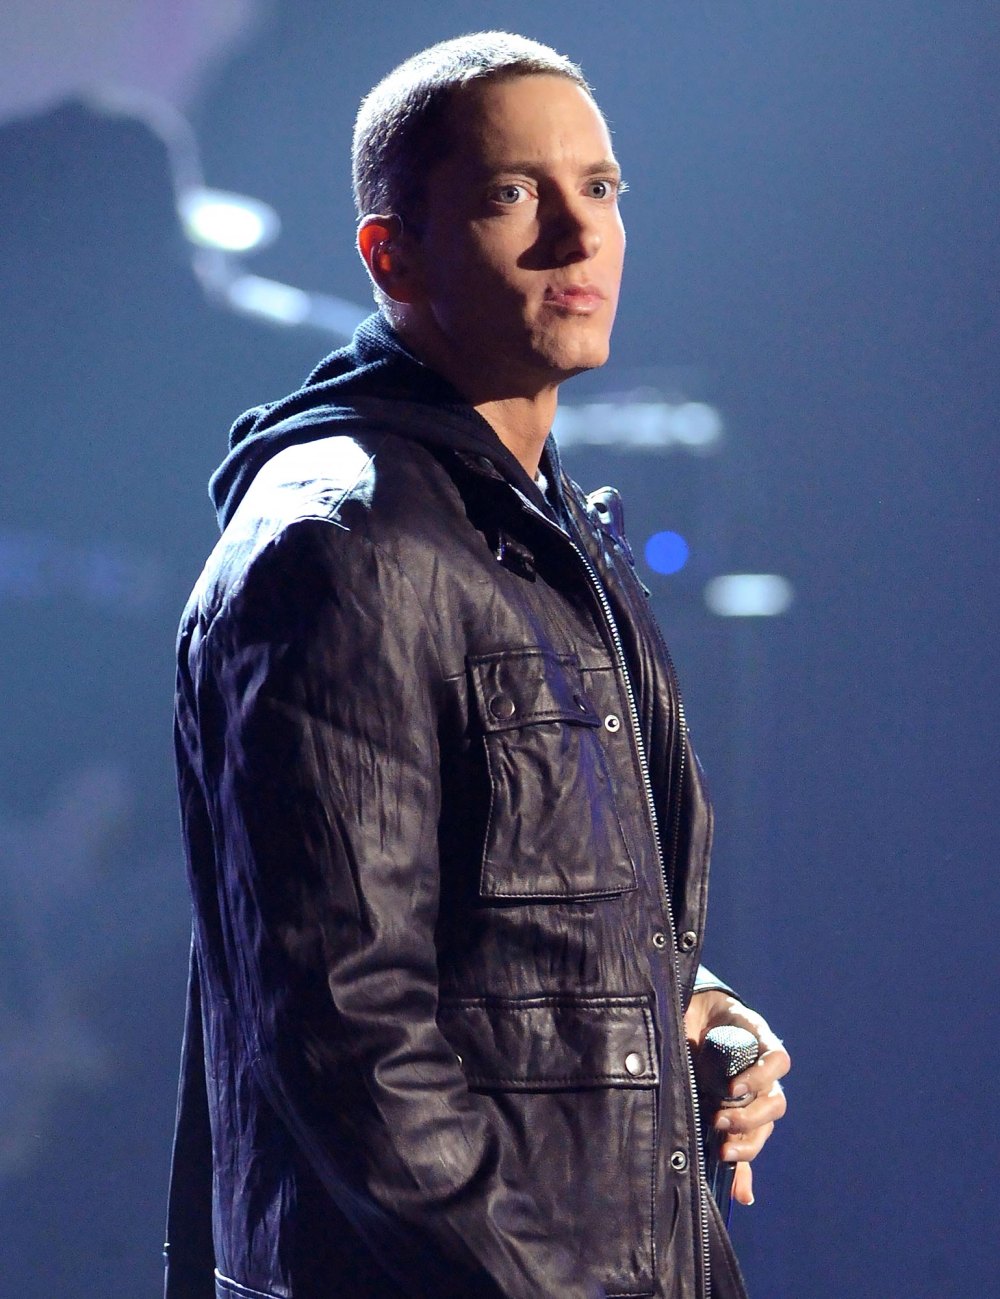 Eminem Is ‘Looking for Stans’ to Share Their Stories for an Upcoming Documentary